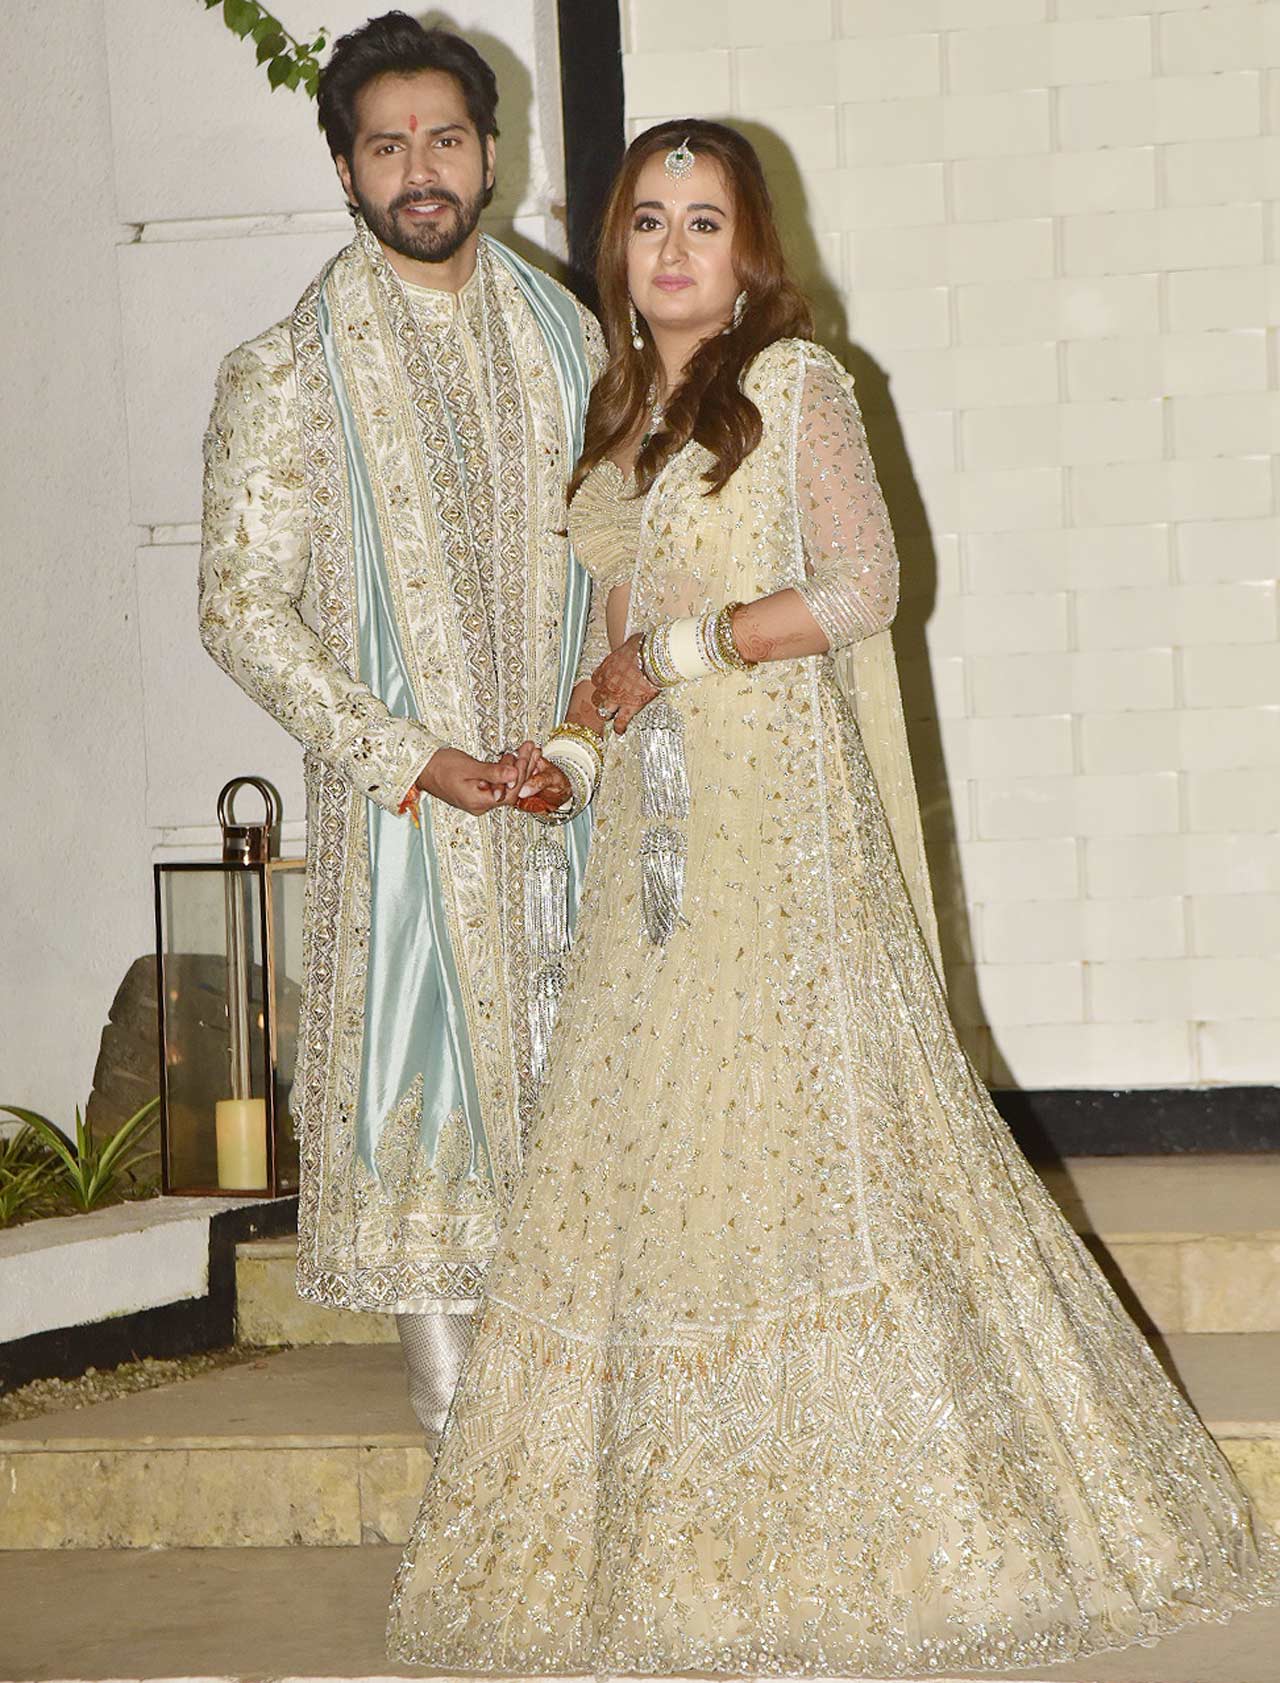 Varun Dhawan's Wife, Natasha Dalal's Pre-Wedding White Outfit Costs  Approximately Rs 6,000 Only